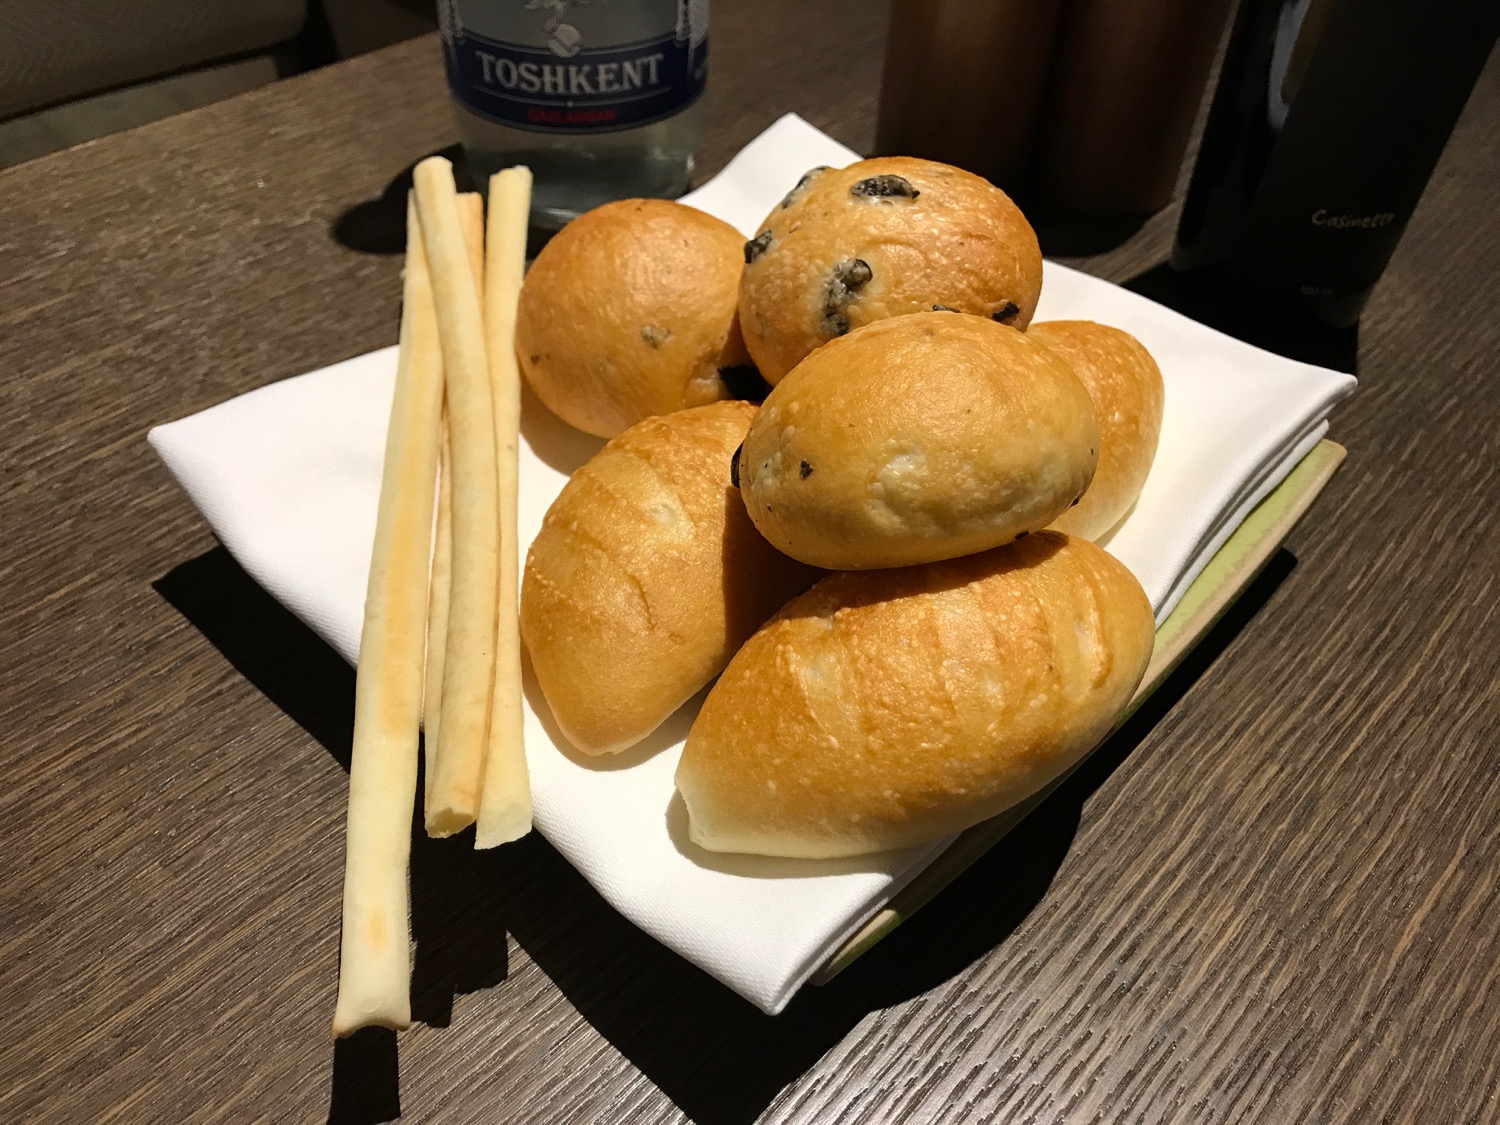 a plate of bread rolls and a bottle of water